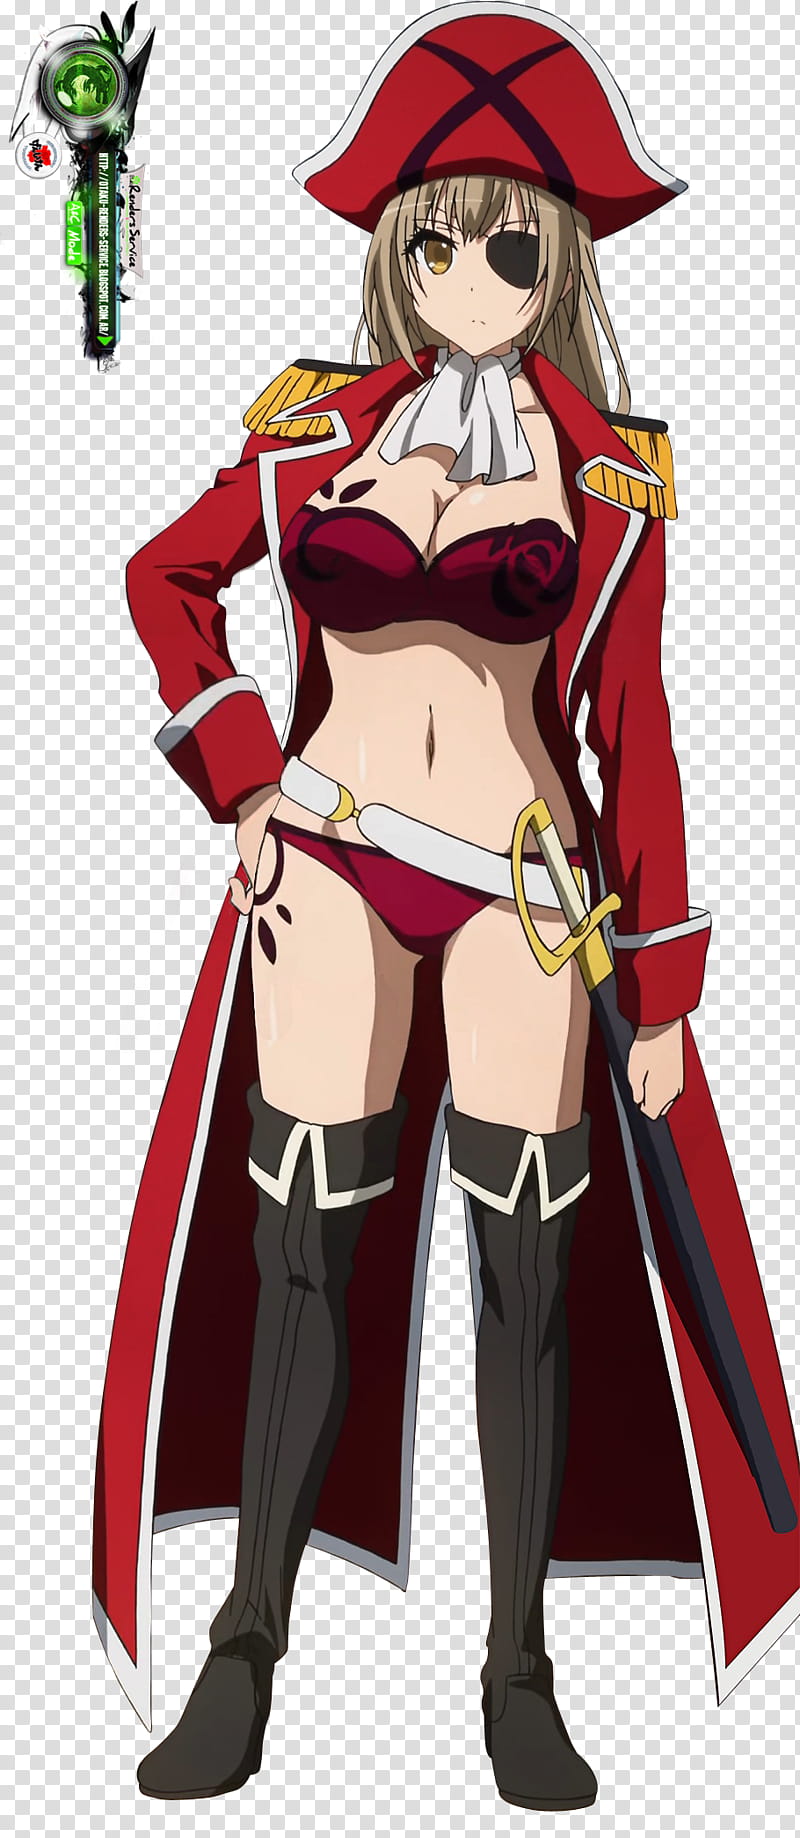 Amagi Brilliant Park Sento Isuzu Pirate Bikini, girl in red and white suit anime character illustration transparent background PNG clipart